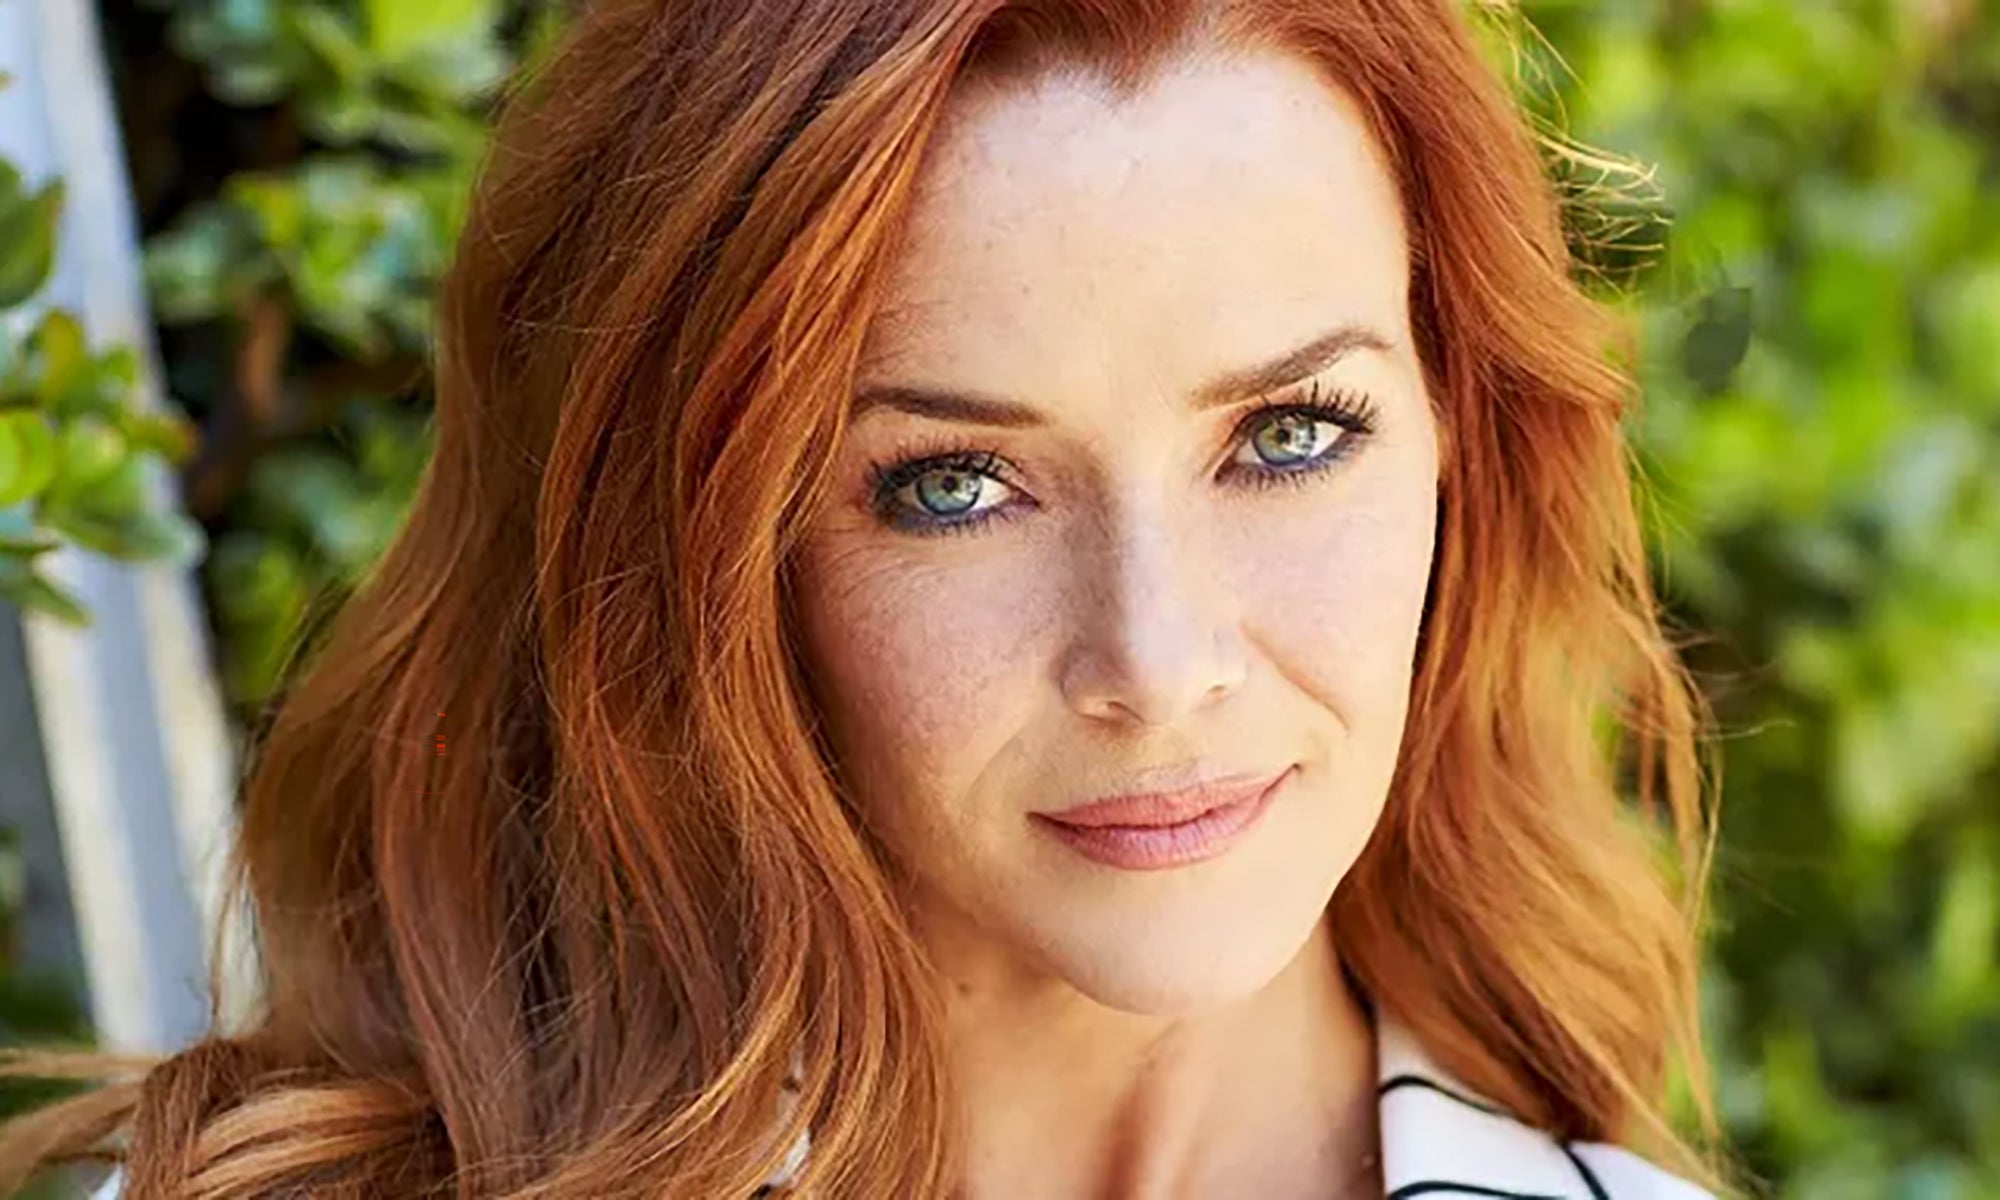 Image for Annie Wersching of Star Trek & 24 fame has died at age 45